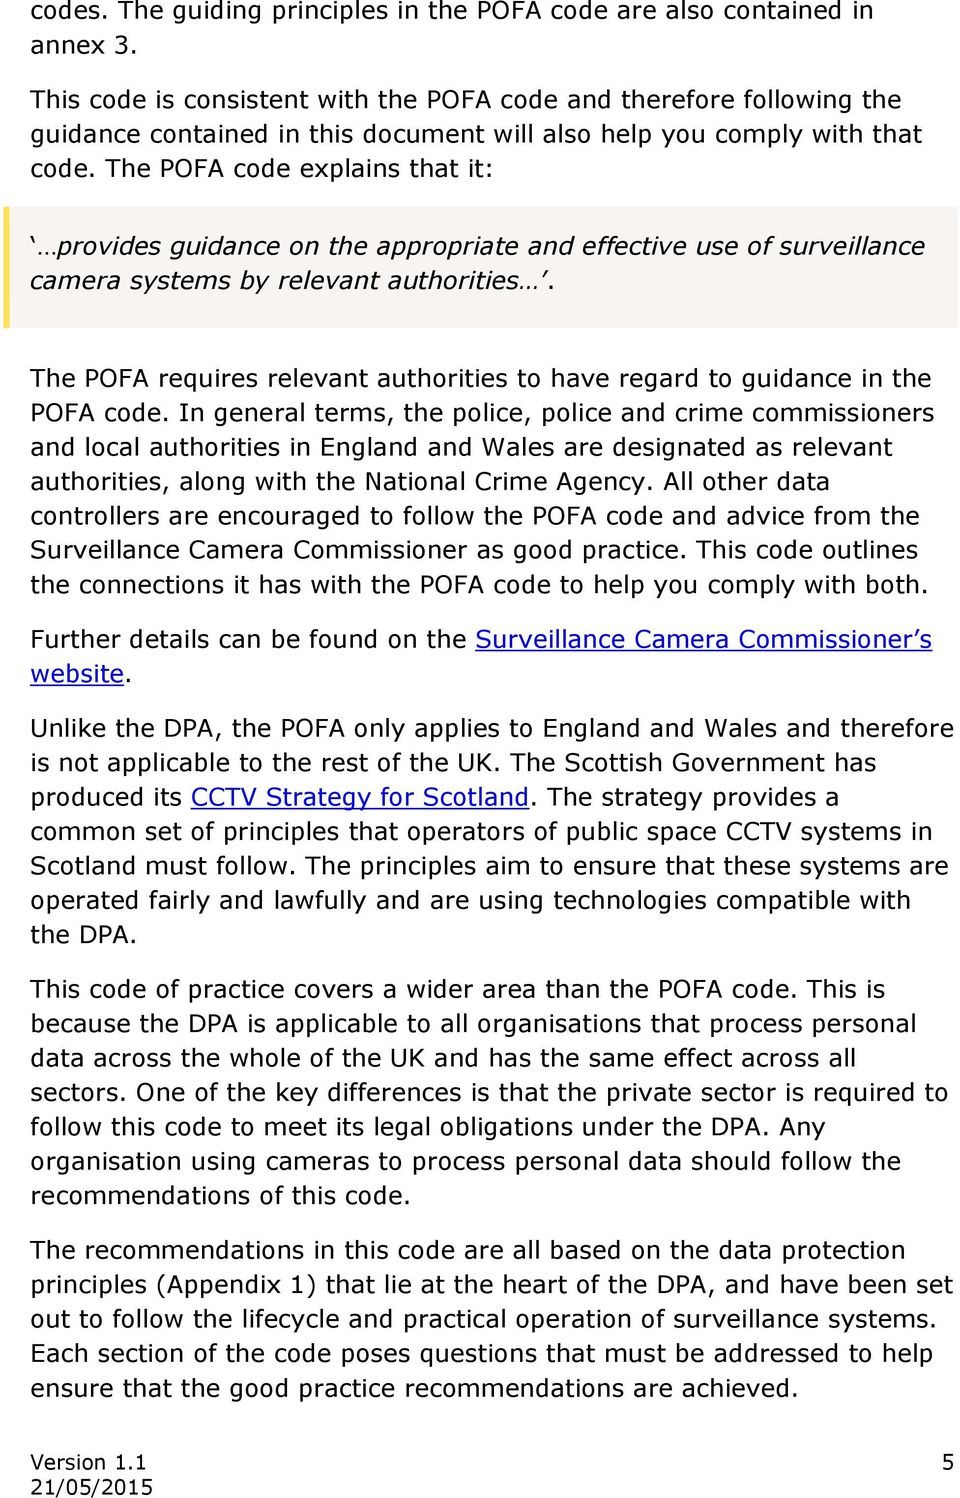 The POFA code explains that it: provides guidance on the appropriate and effective use of surveillance camera systems by relevant authorities.